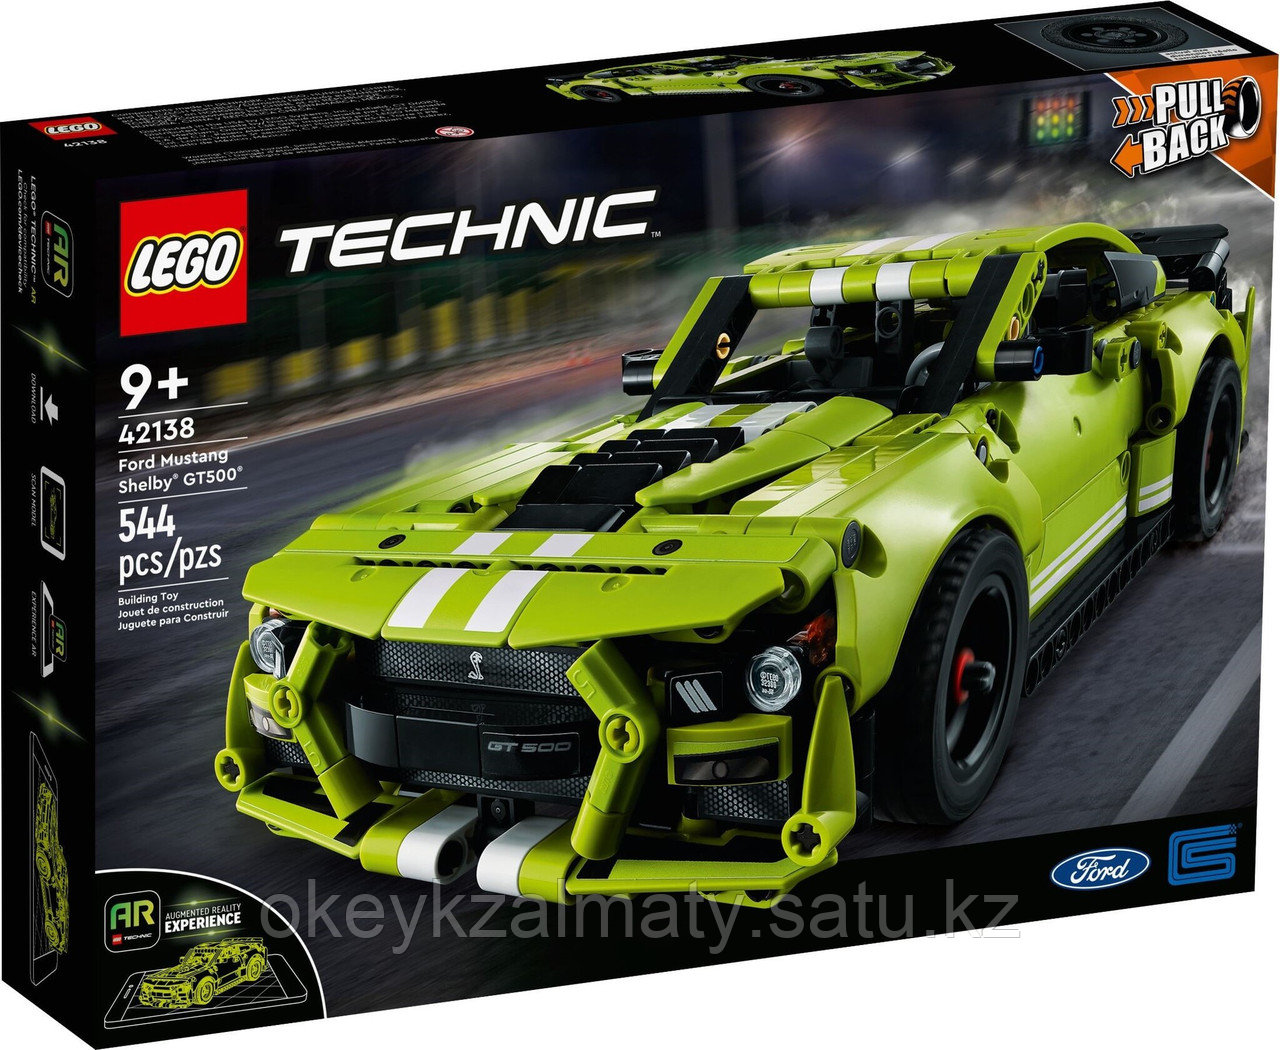 LEGO Technic: Ford Mustang Shelby GT500, 42138